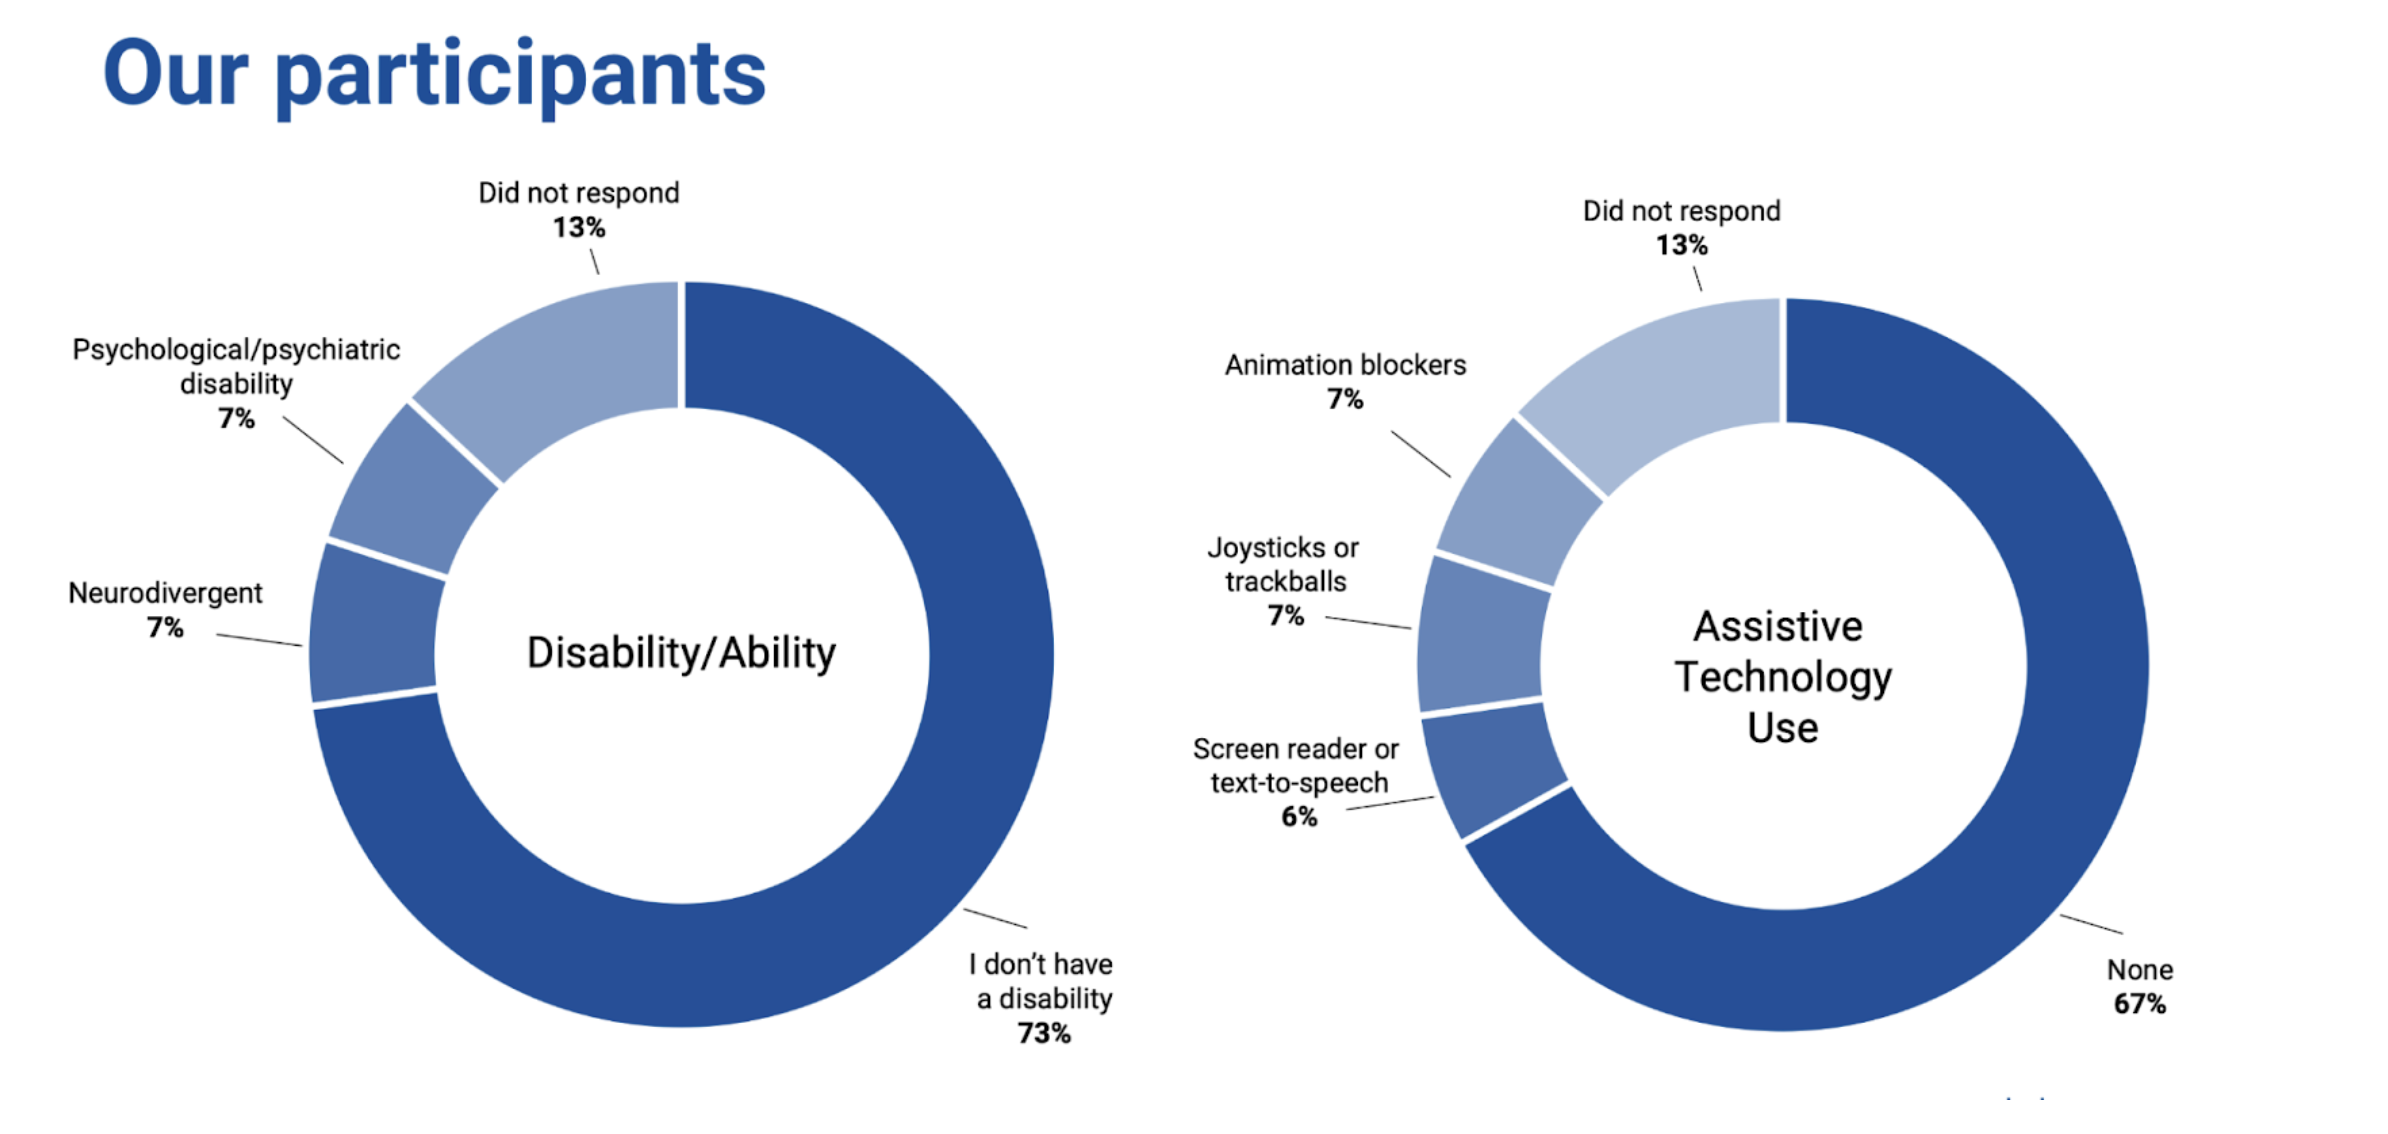 Our participants pie charts. Left chart title - Disability/Ability: 73% I don't have a disability, 13% did not respond, 7% Psychological/psychiatric disability, 7% Neurodivergent. Right chart title - Assistive Technology Use: 67% None, 13% did not respond, 7% Animation blockers, 7% Joysticks or trackballs, 6% screen readers or text-to-speech